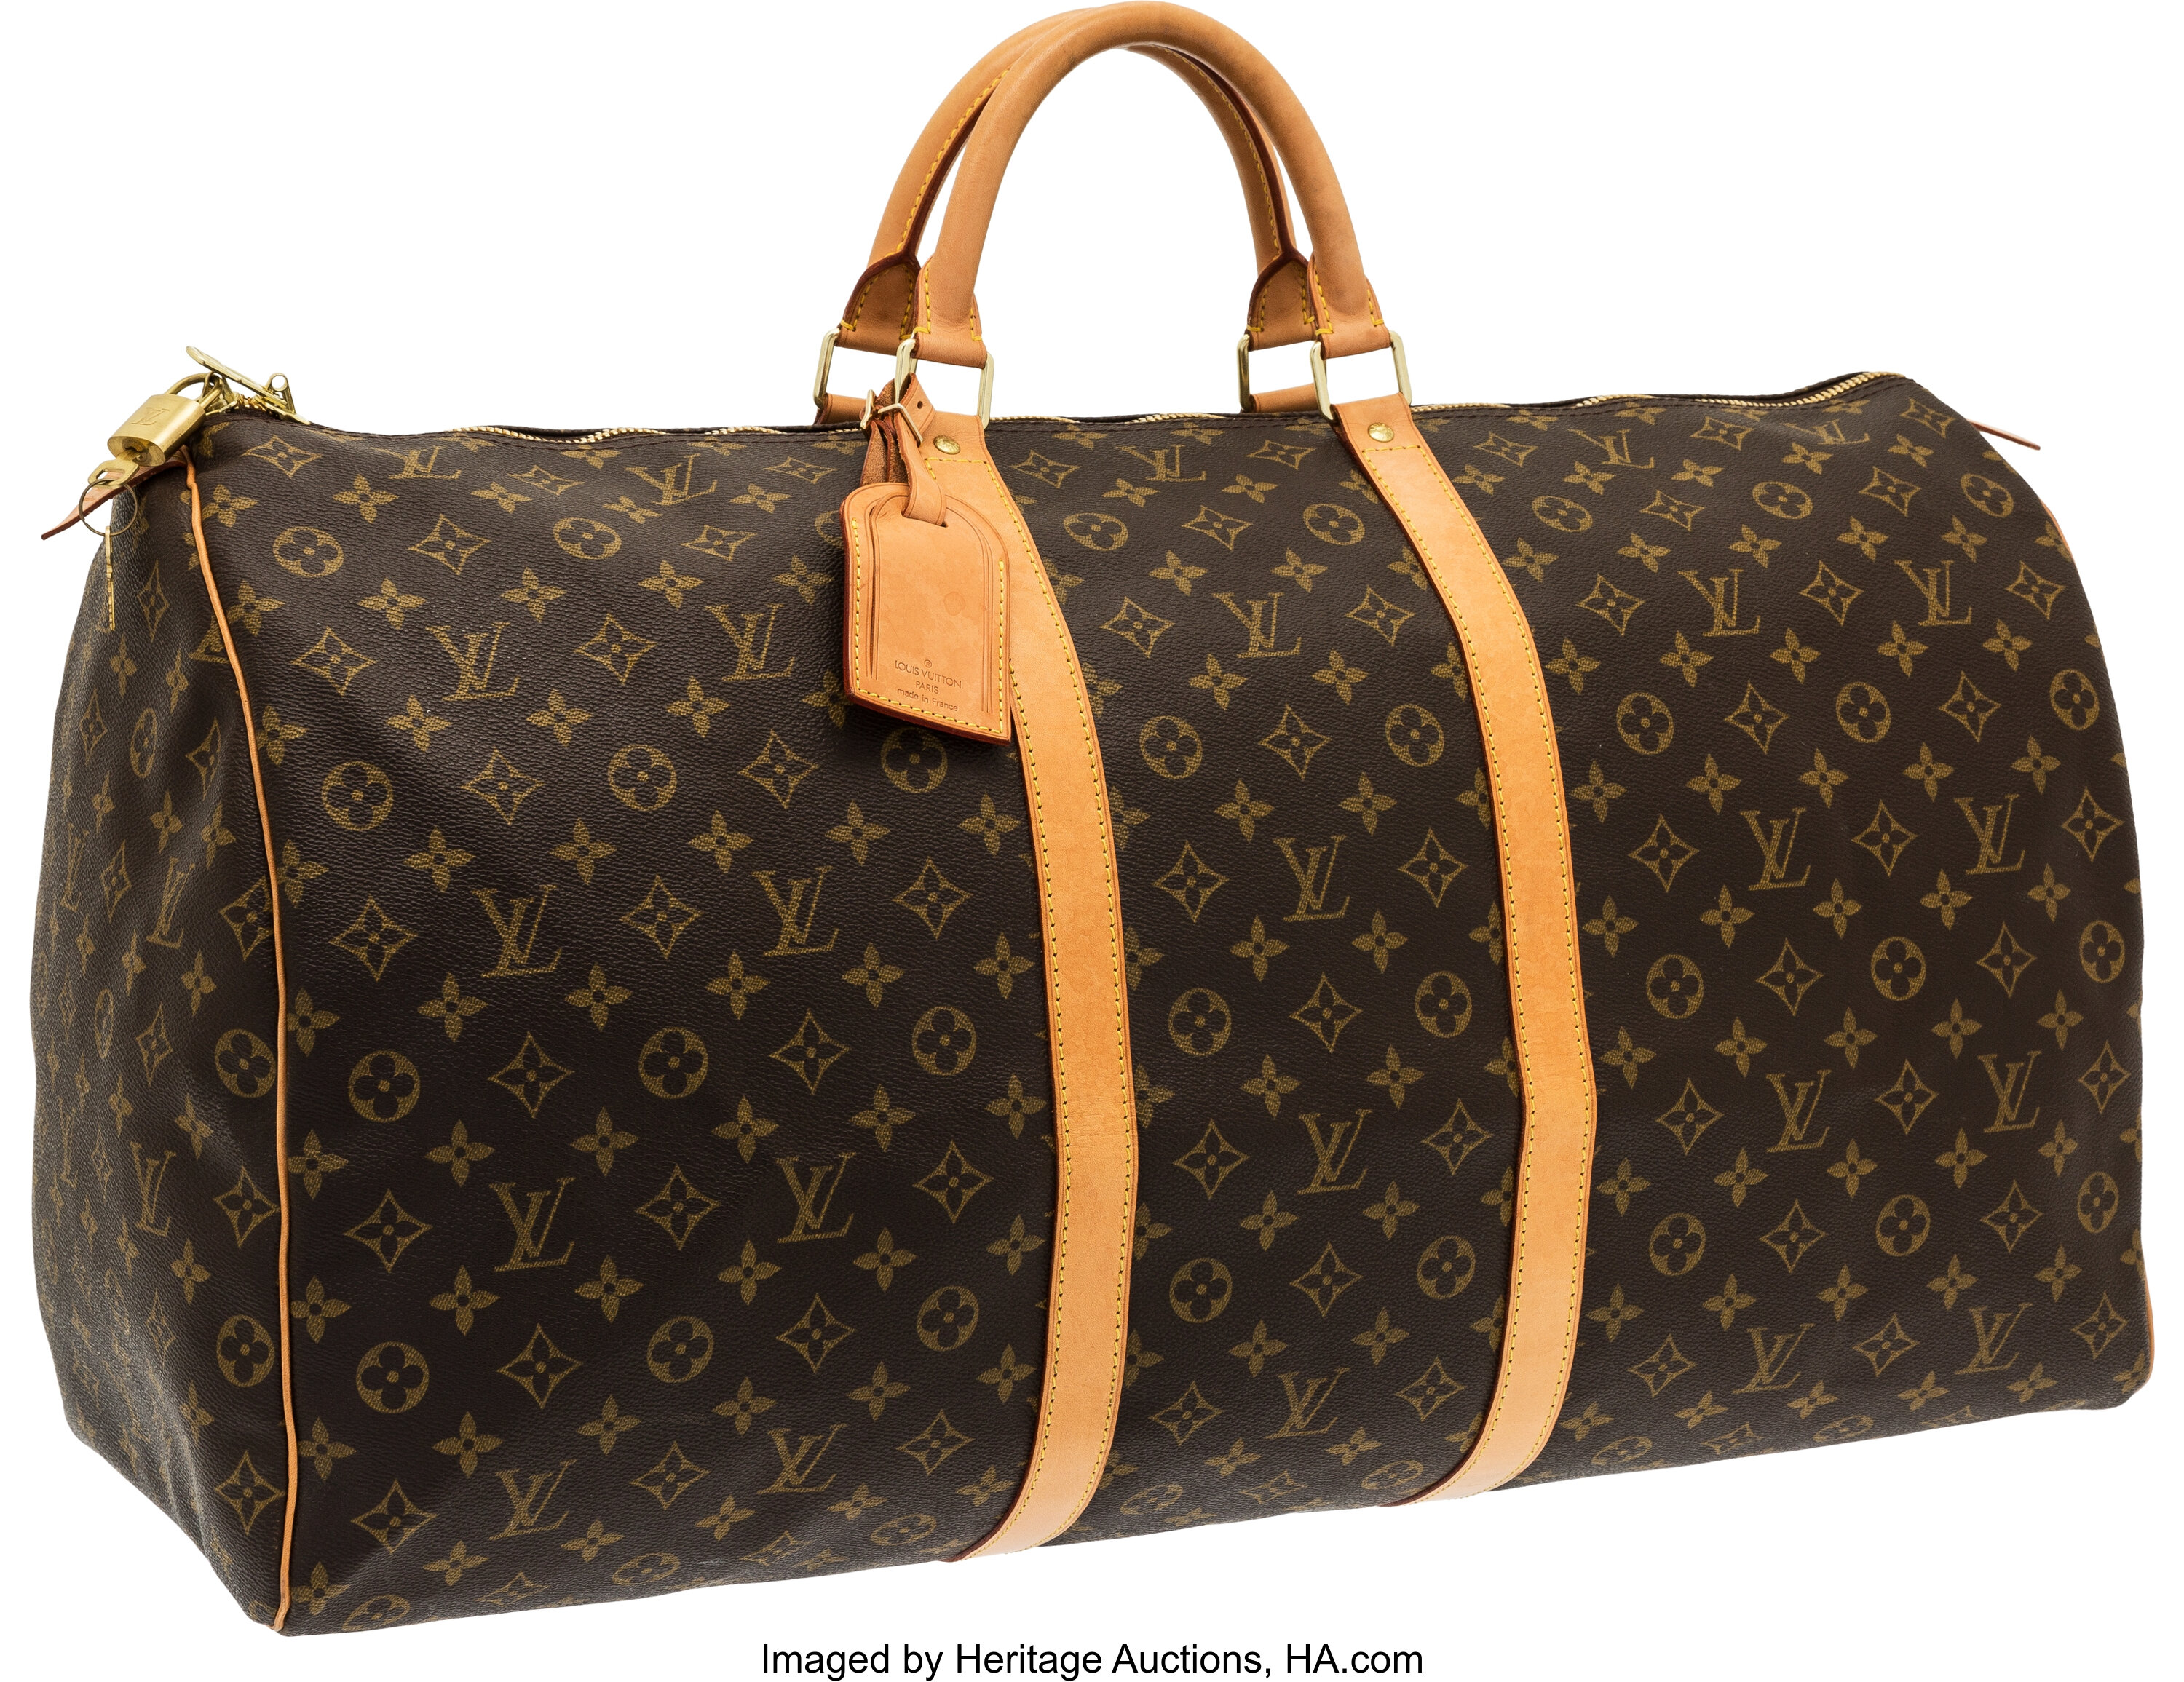 Louis Vuitton Classic Monogram Canvas Keepall 60 Weekender Bag. | Lot #58816 | Heritage Auctions